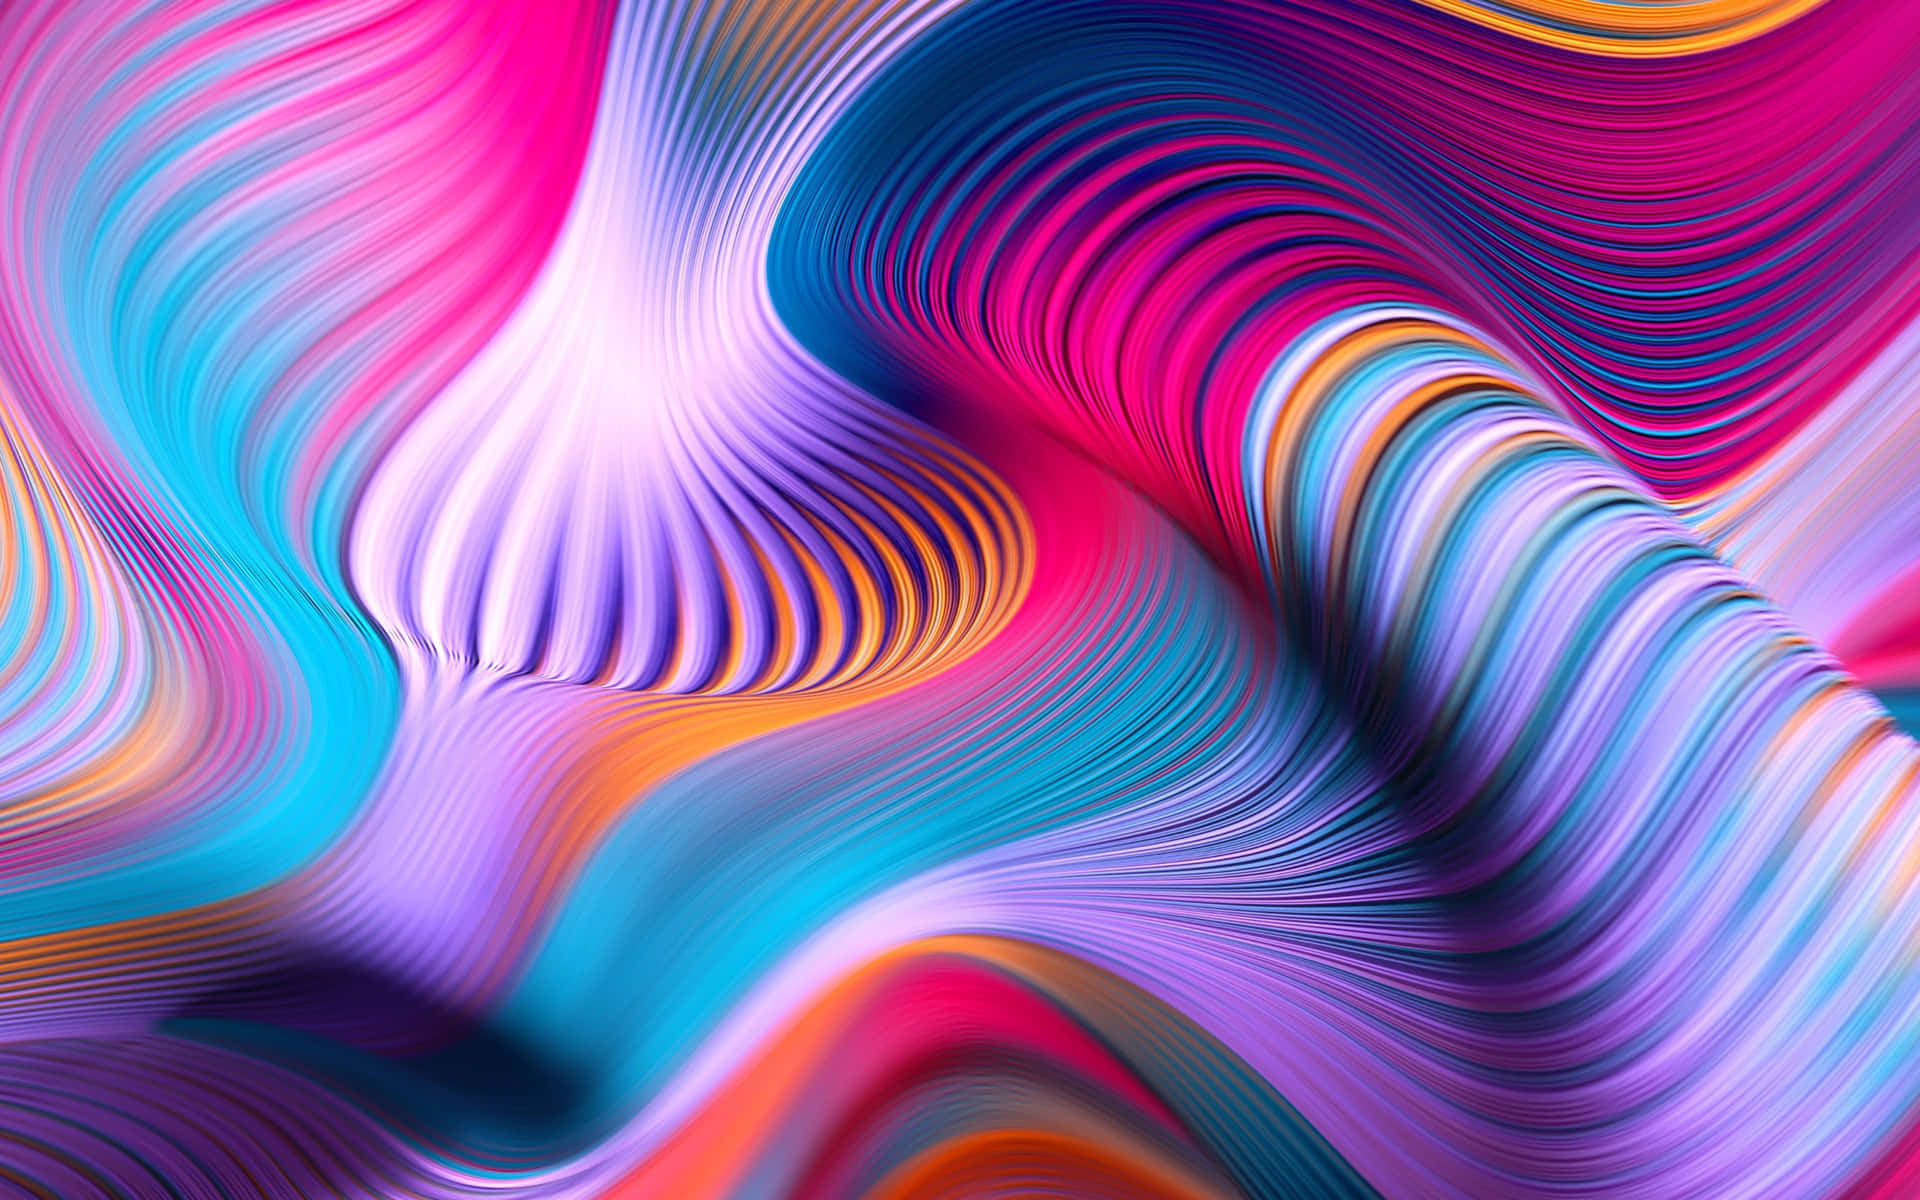 Wavy Abstract Background